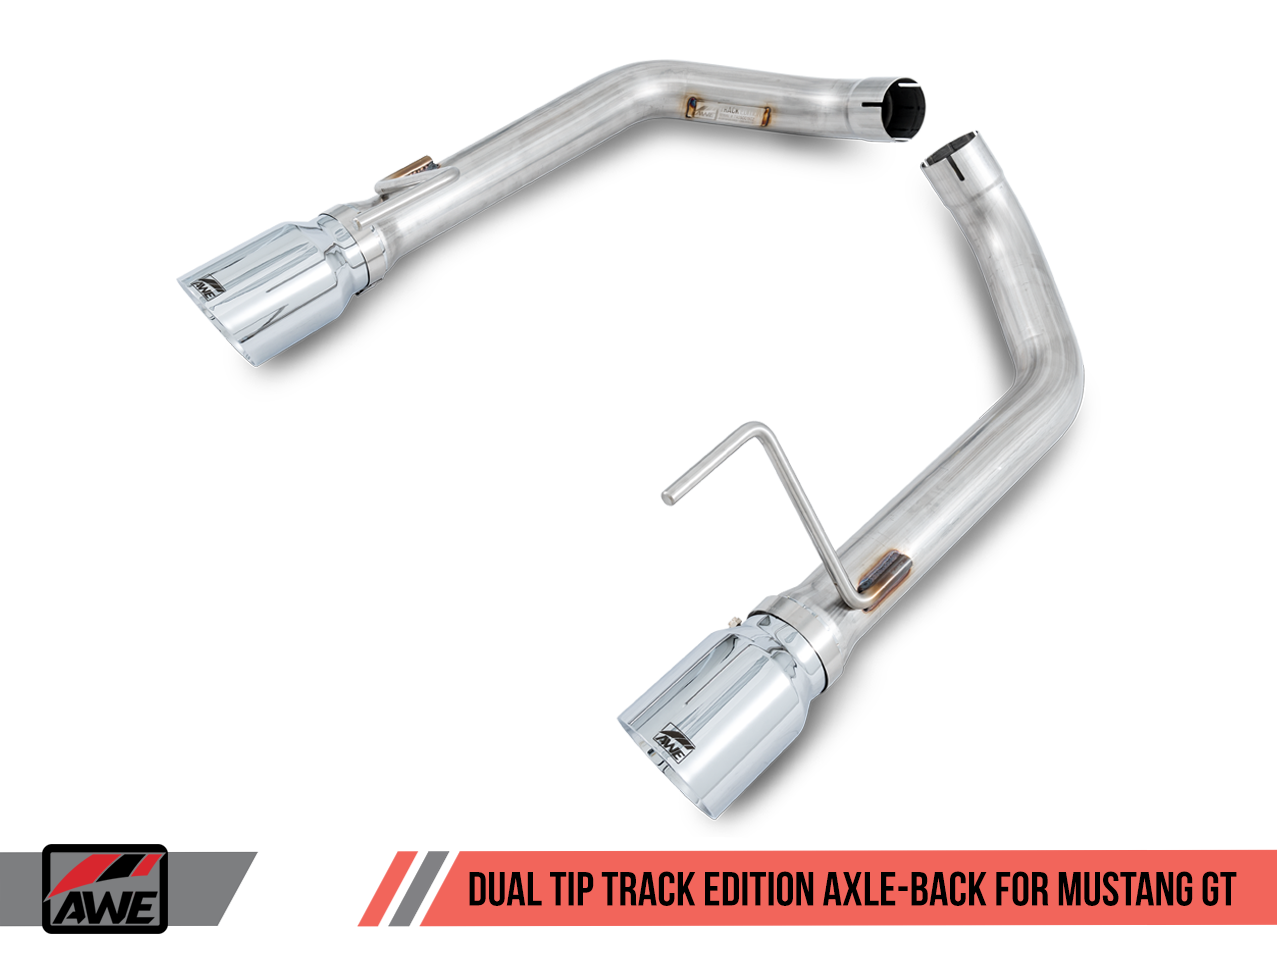 2015-2017 Ford Mustang GT 5.0L V8 AWE Track Edition Axleback Exhaust System w/Chrome Silver Tips